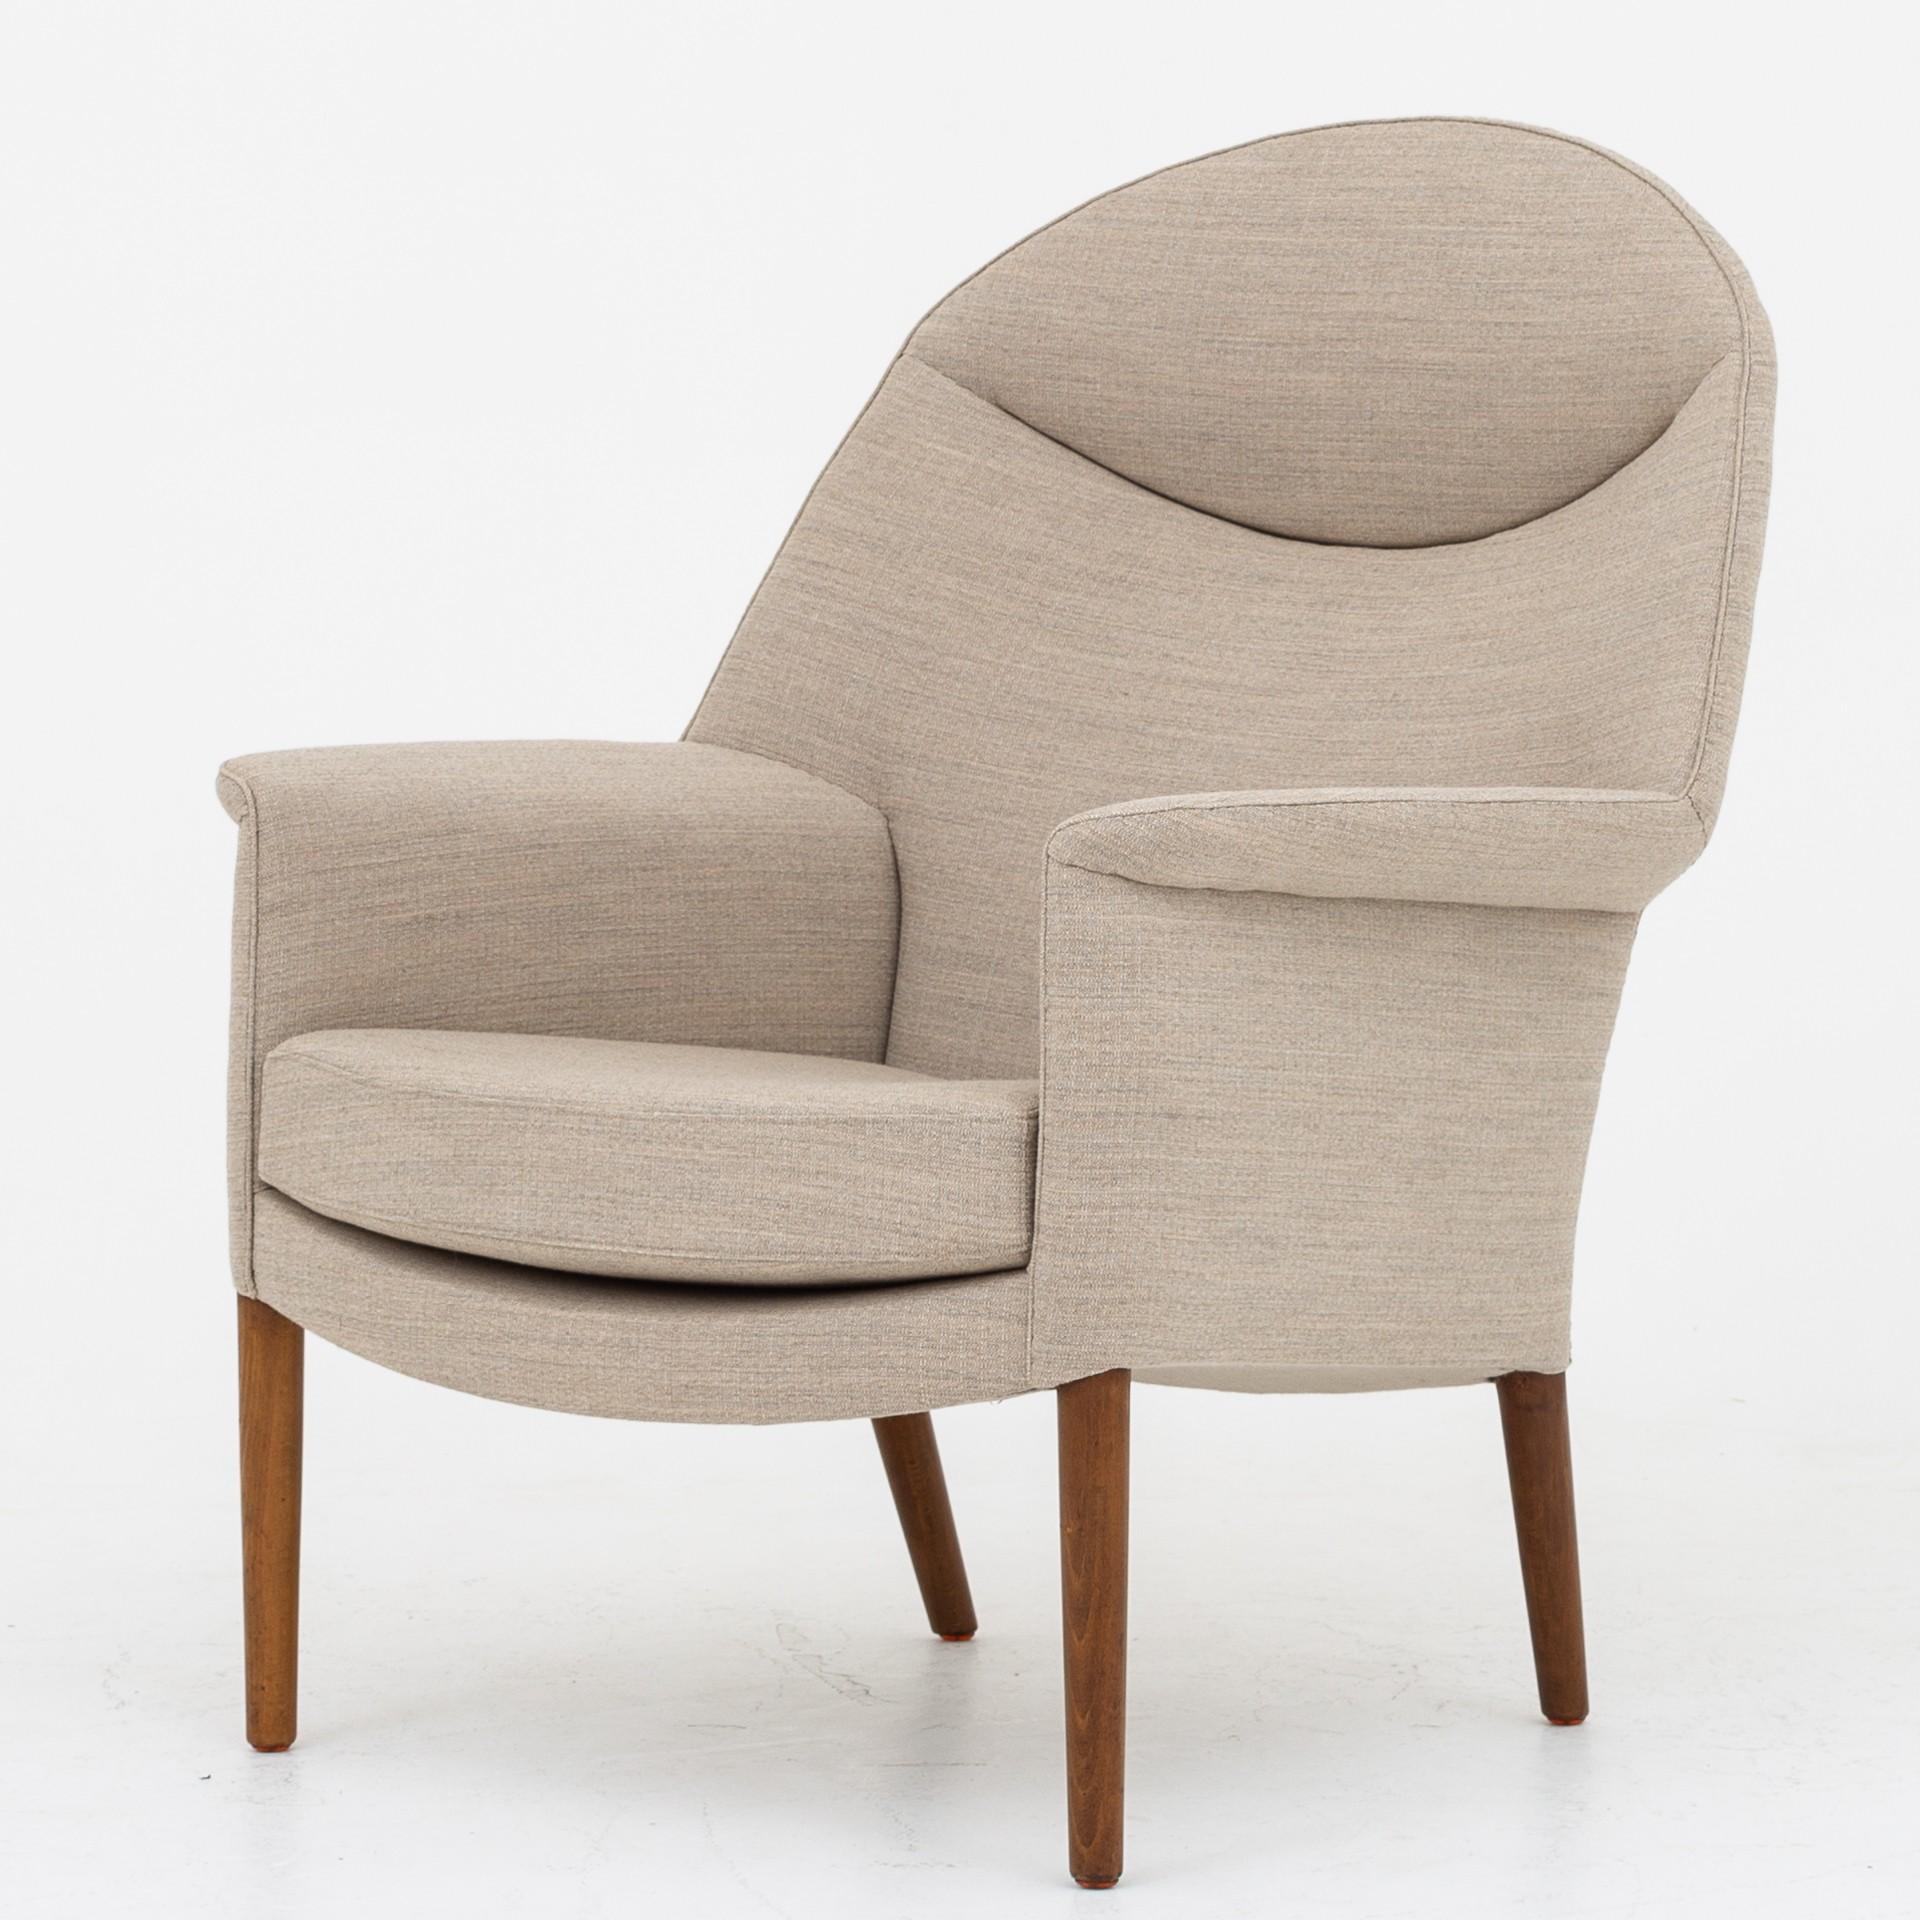 A pair of easy chairs with new Foss fabric (code 212) by Kvadrat with legs in stained beech. One low back and one tall back. Maker Fritz Hansen.